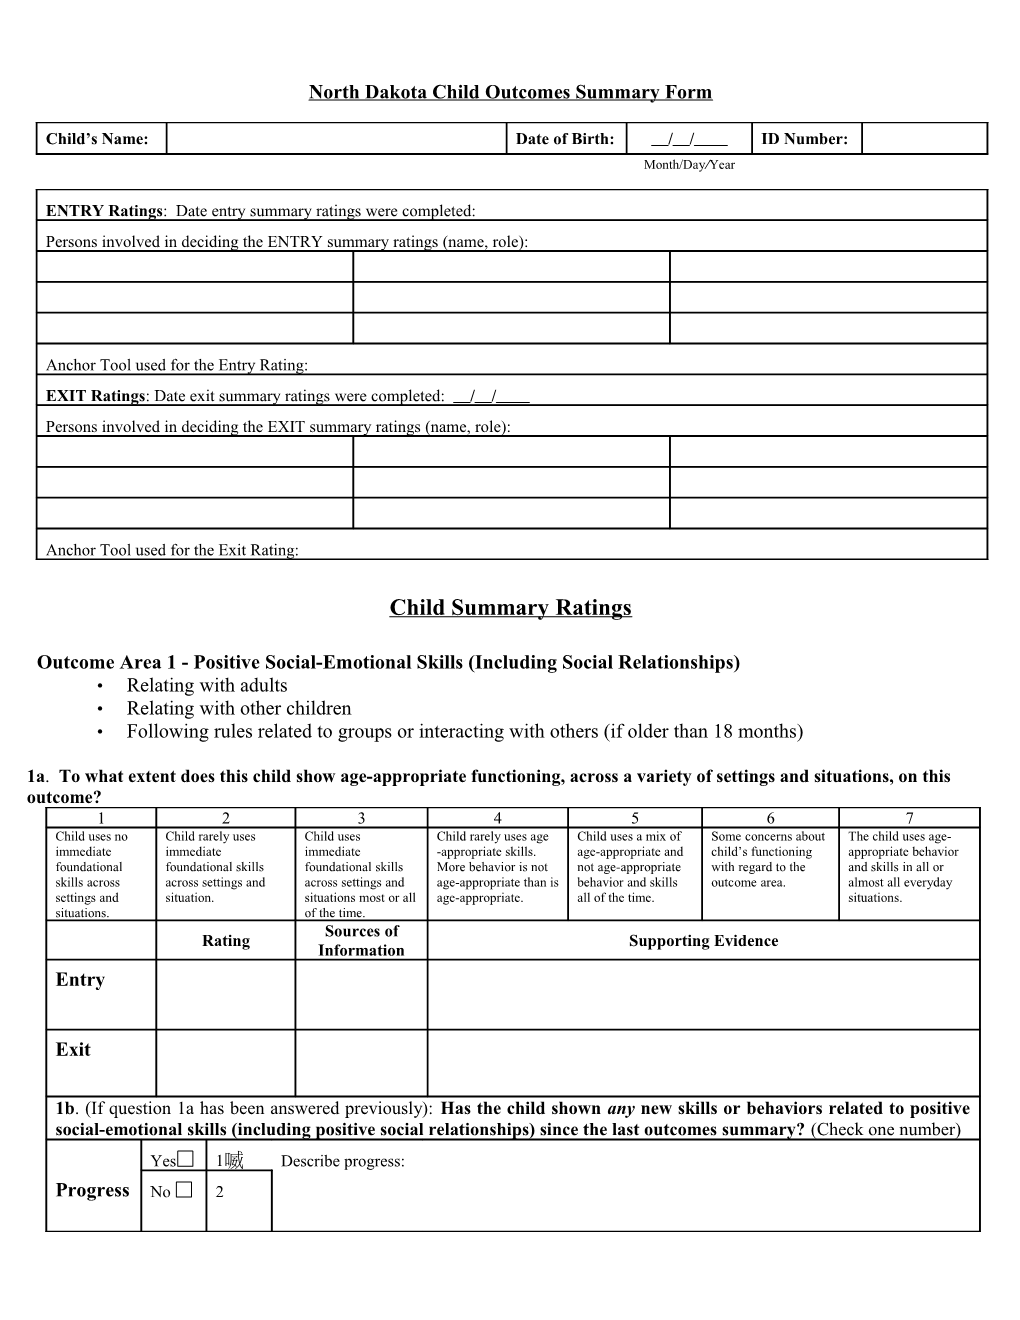 Individual Child Outcomes Summary Form